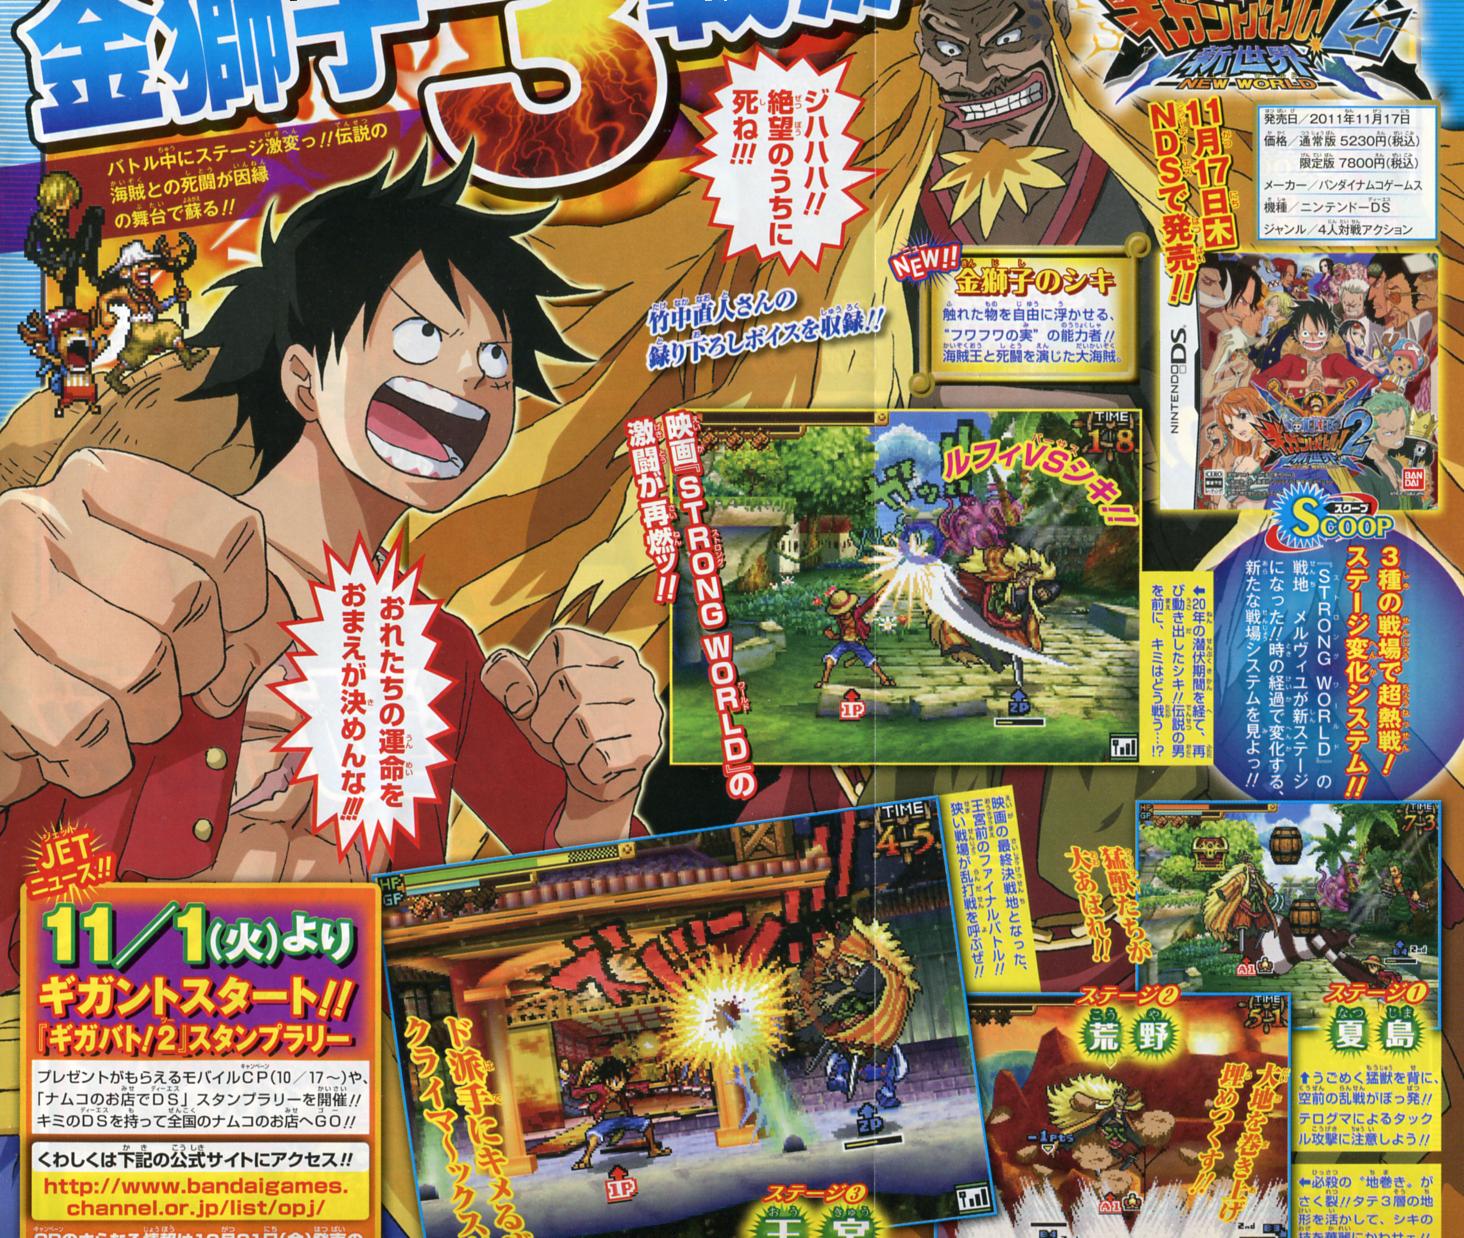 &#91;NDS&#93; One Piece: Gigant Battle! 2 New World